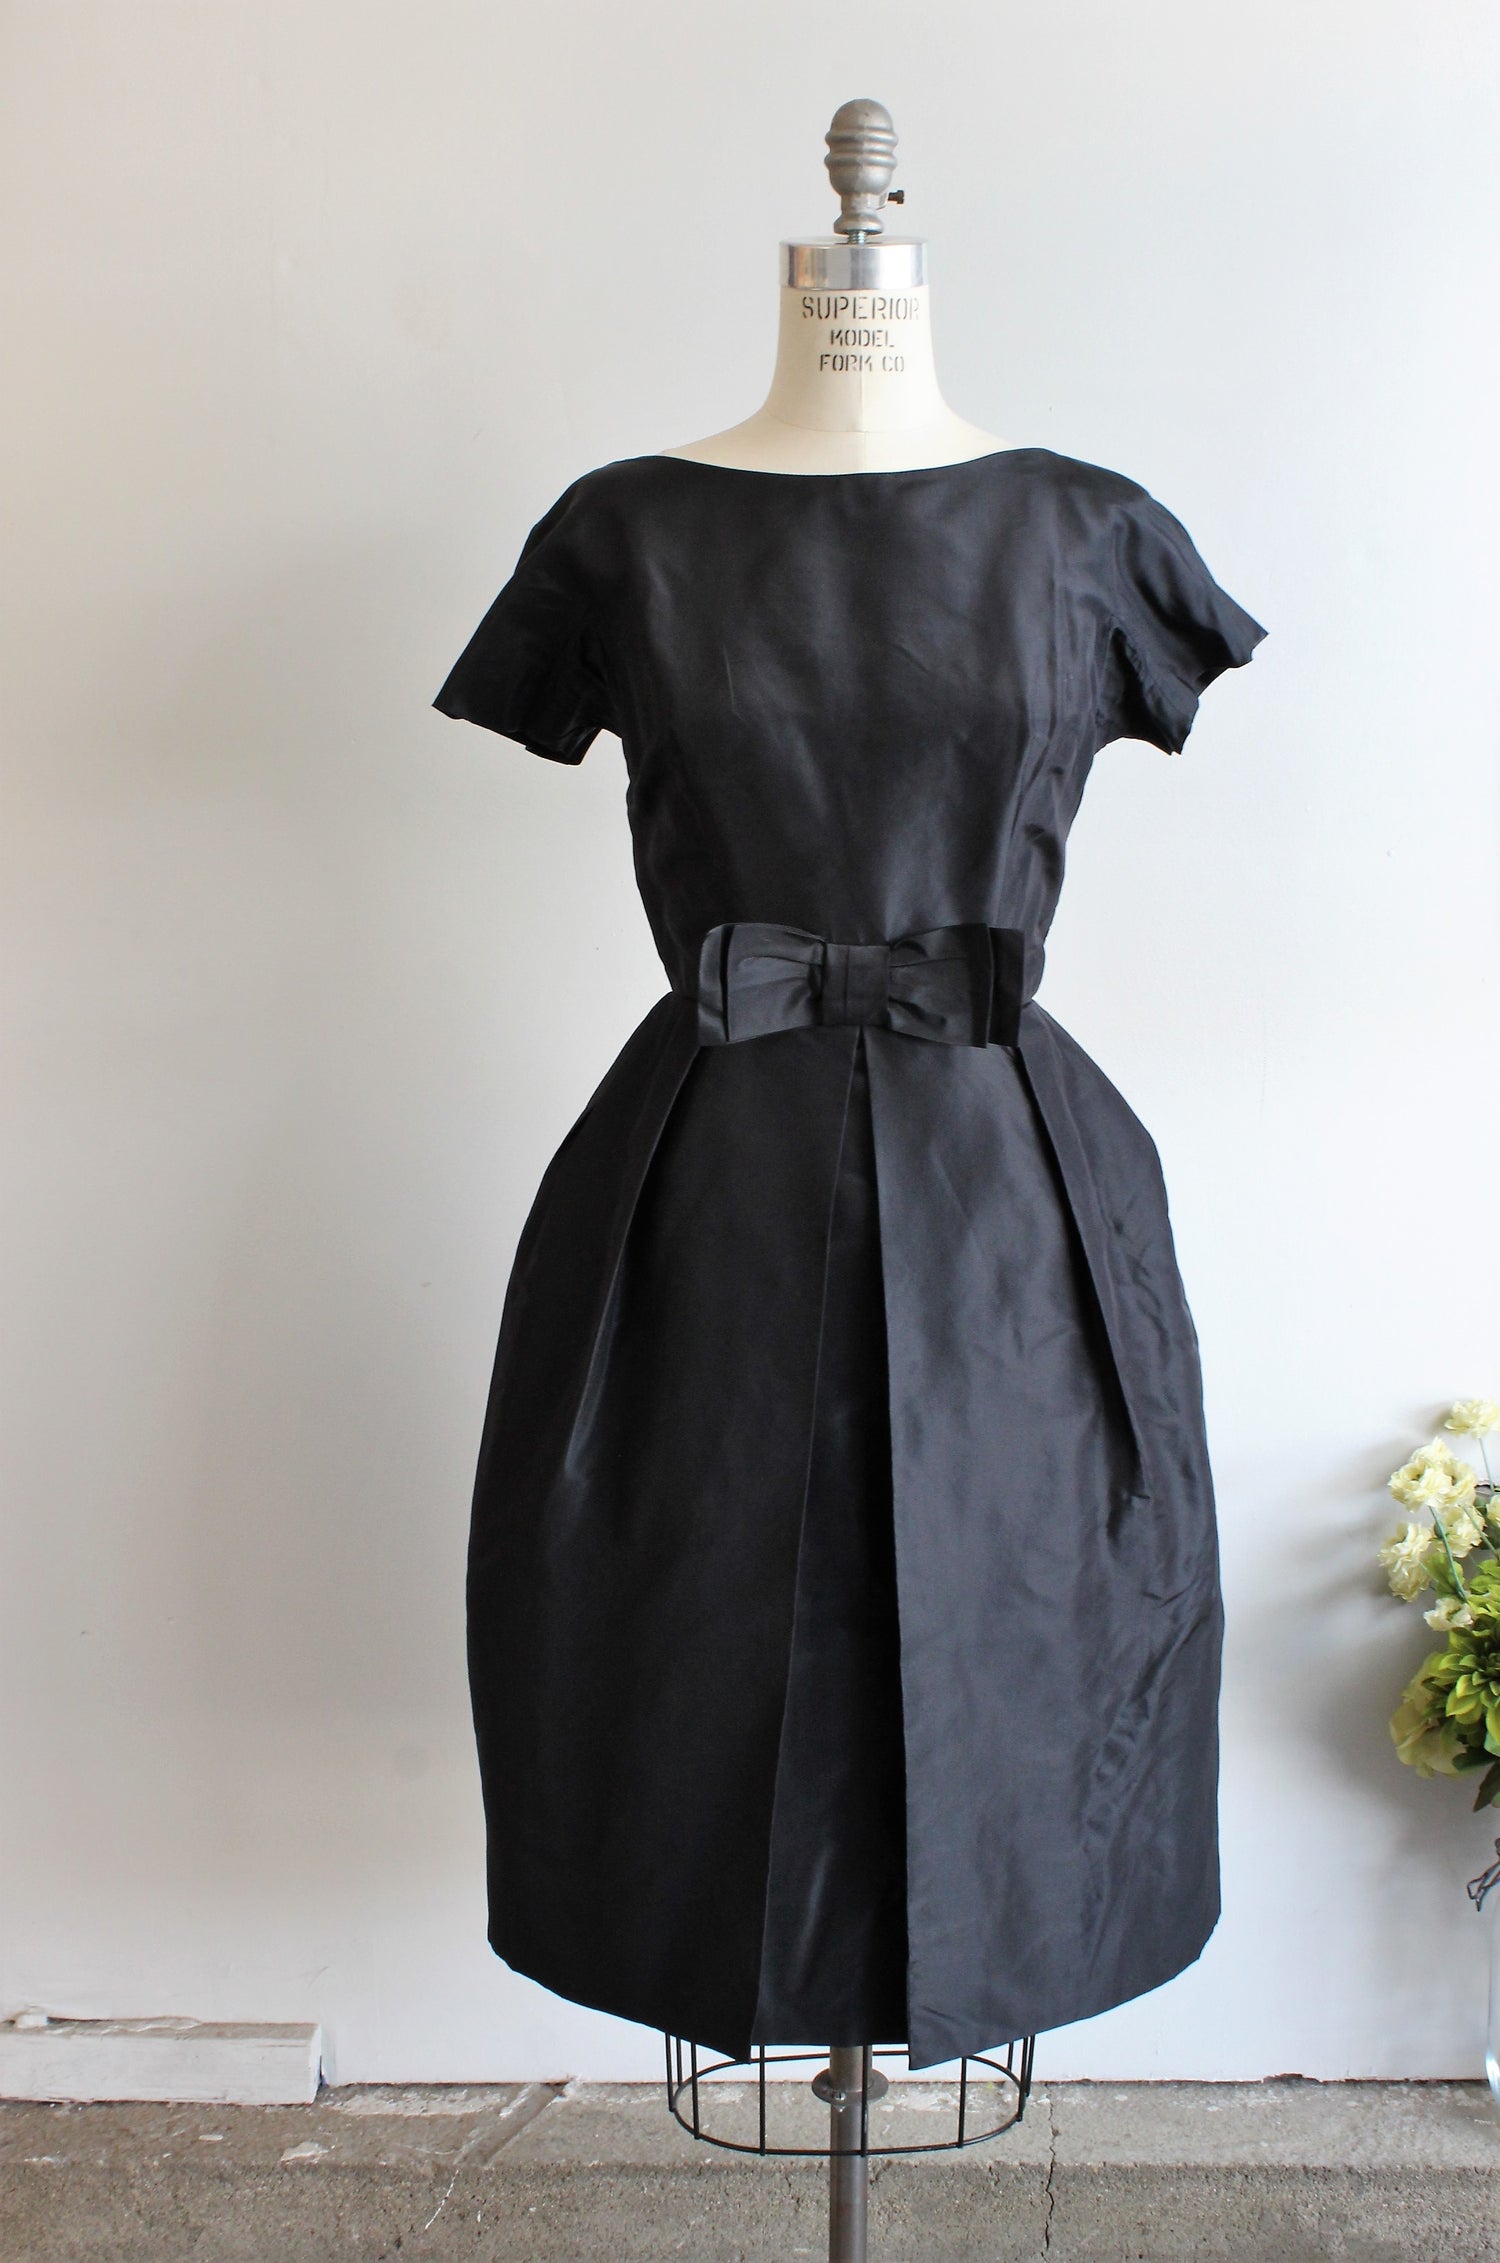 Vintage 1960s Black dress, by Petite Couture Miss Bergdorf, Designed in Paris